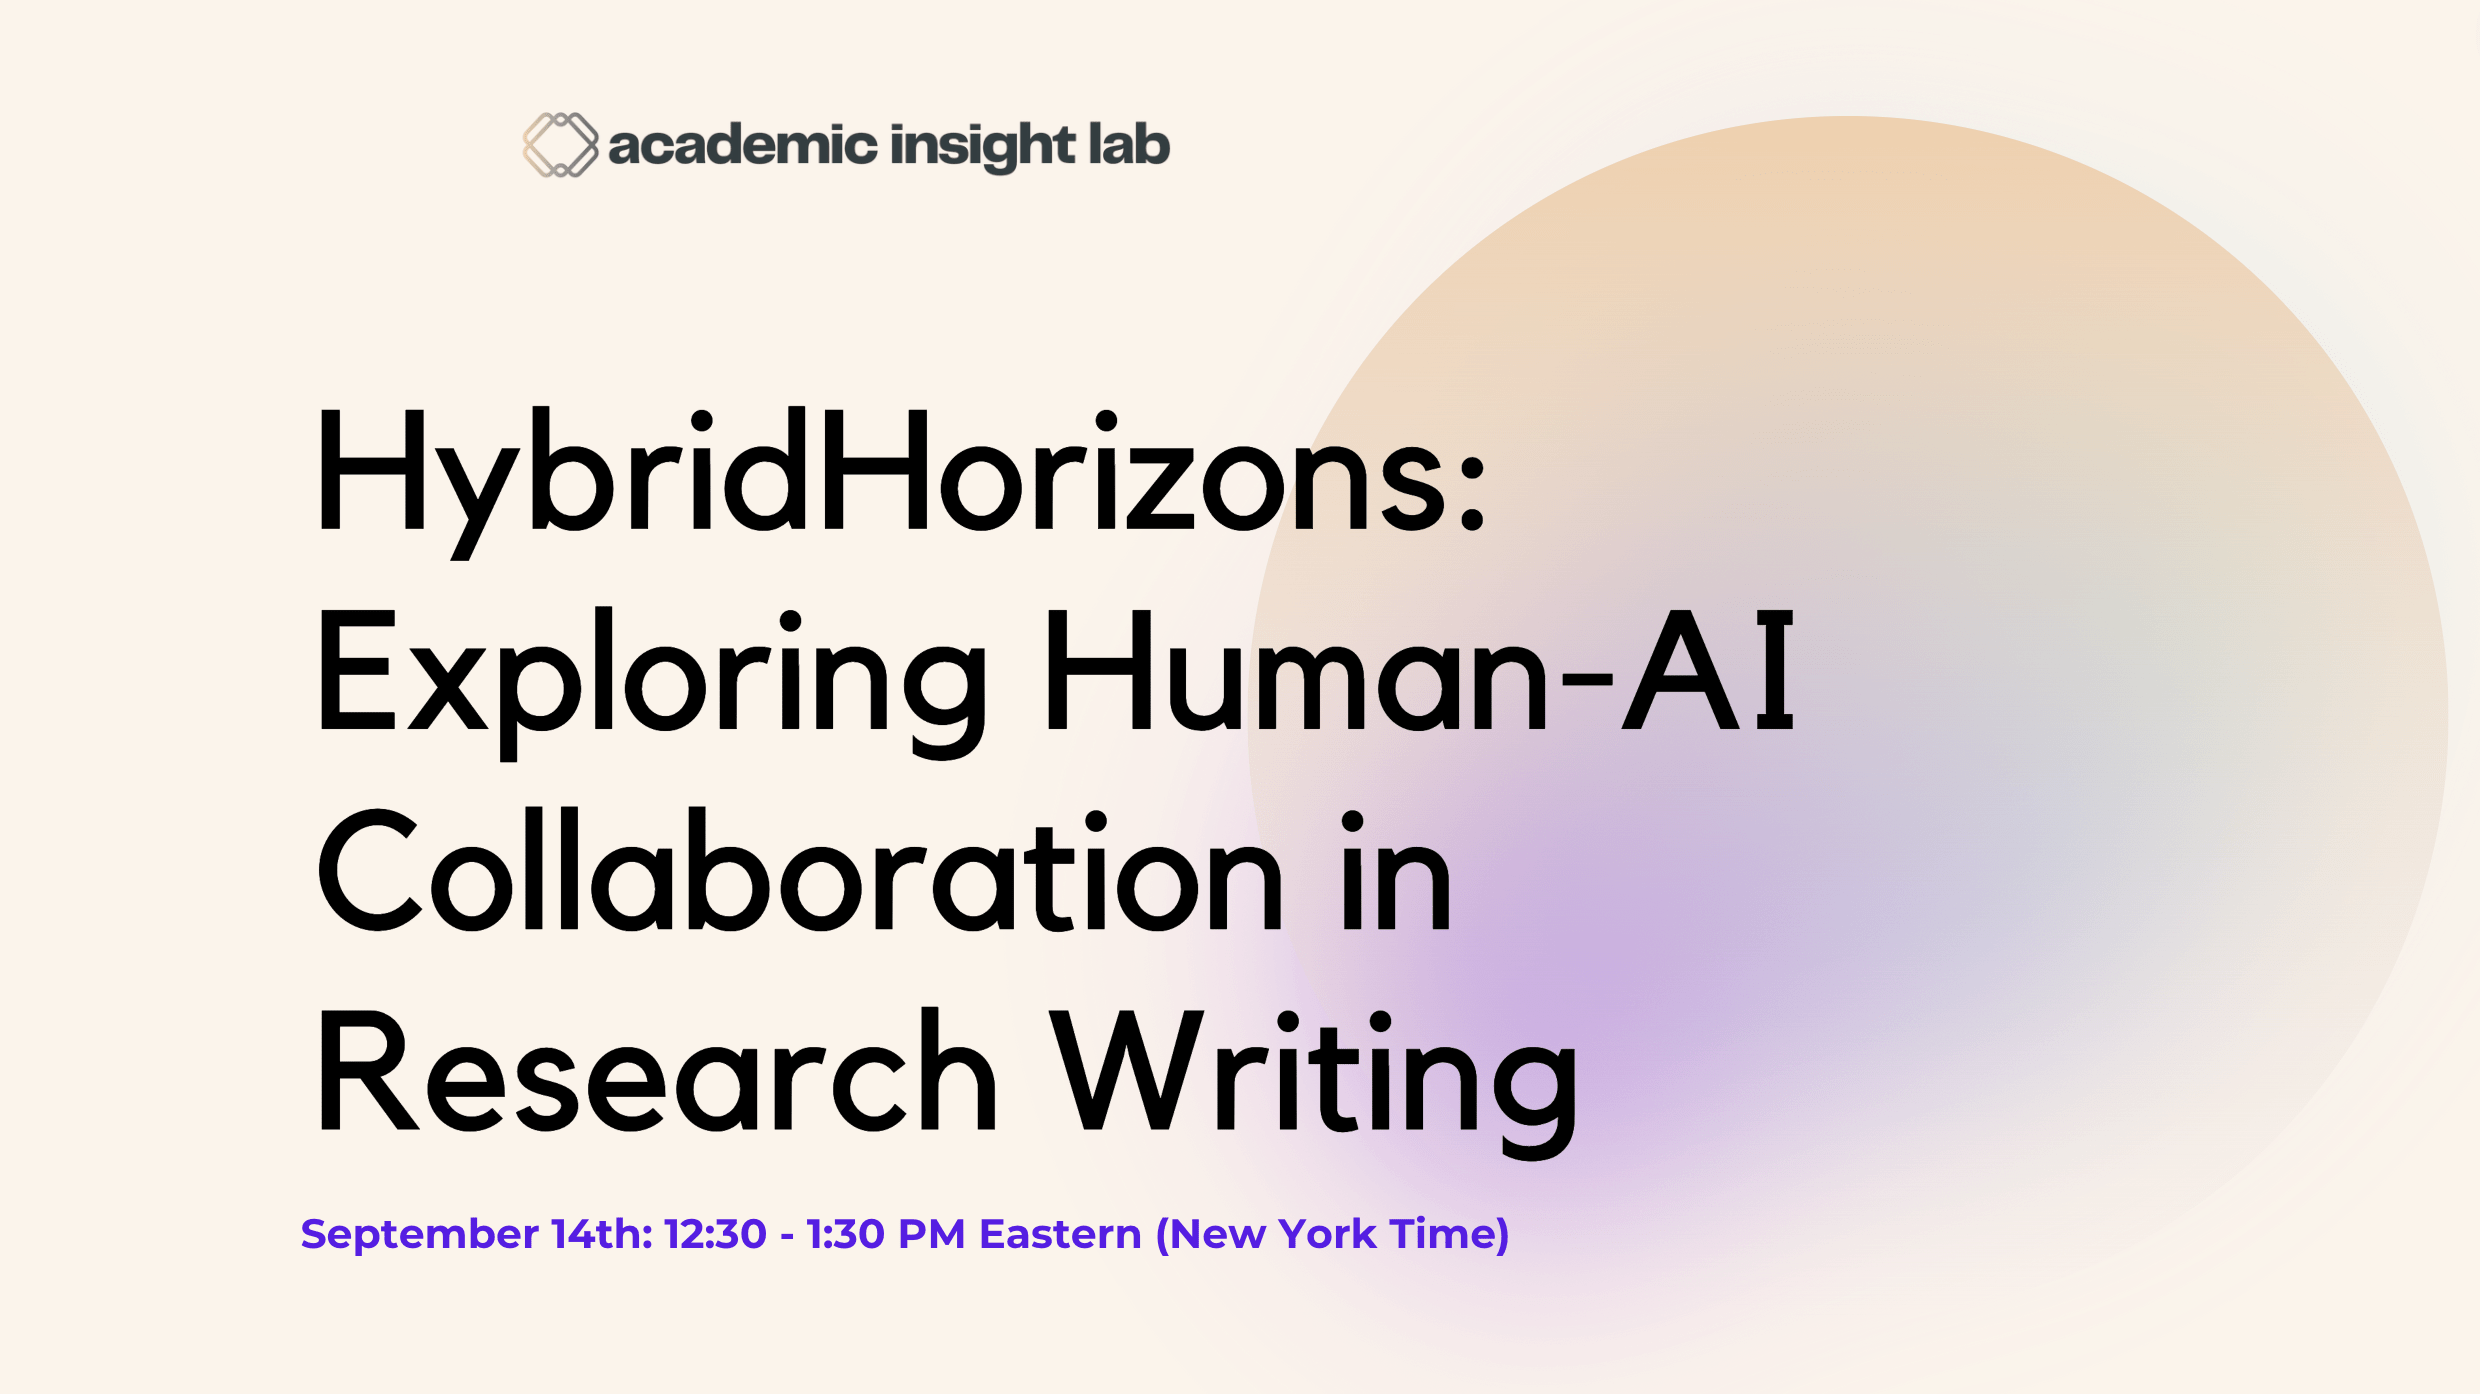 Human-AI Collaboration in Research Writing